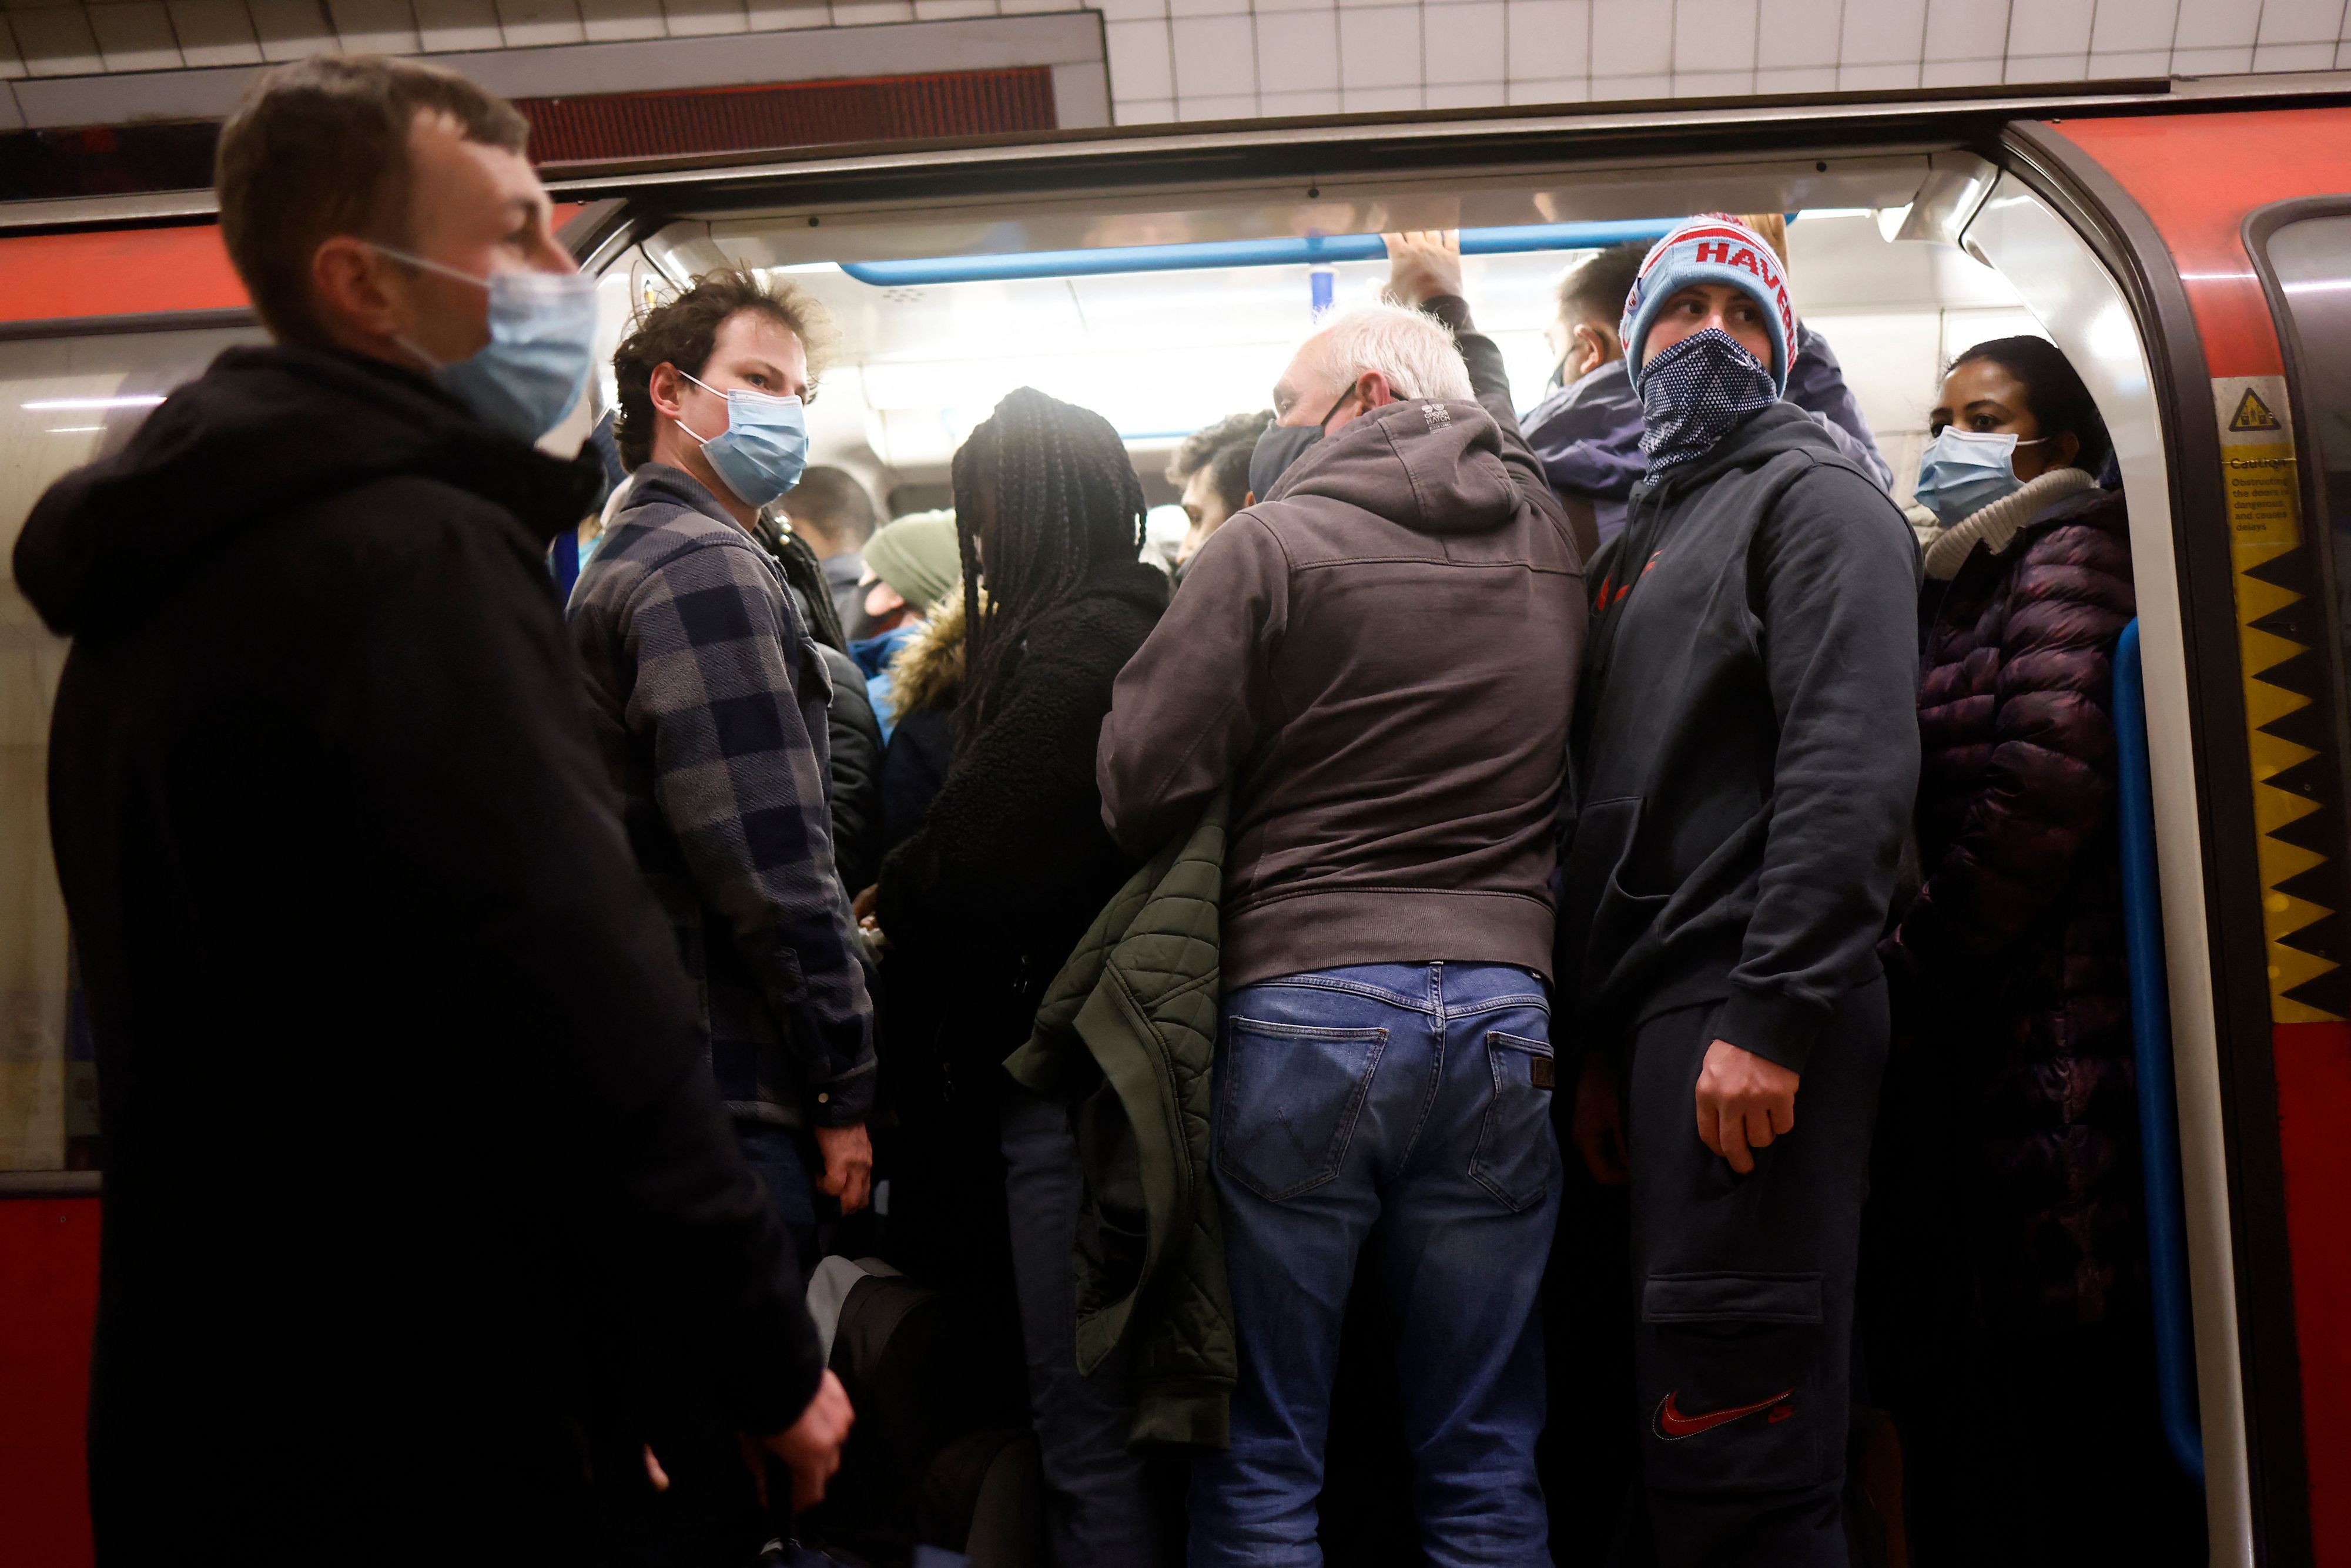 Commuters, some wearing face coverings due to Covid-19, crowd onto a Transport for London (TfL) Underground tube train